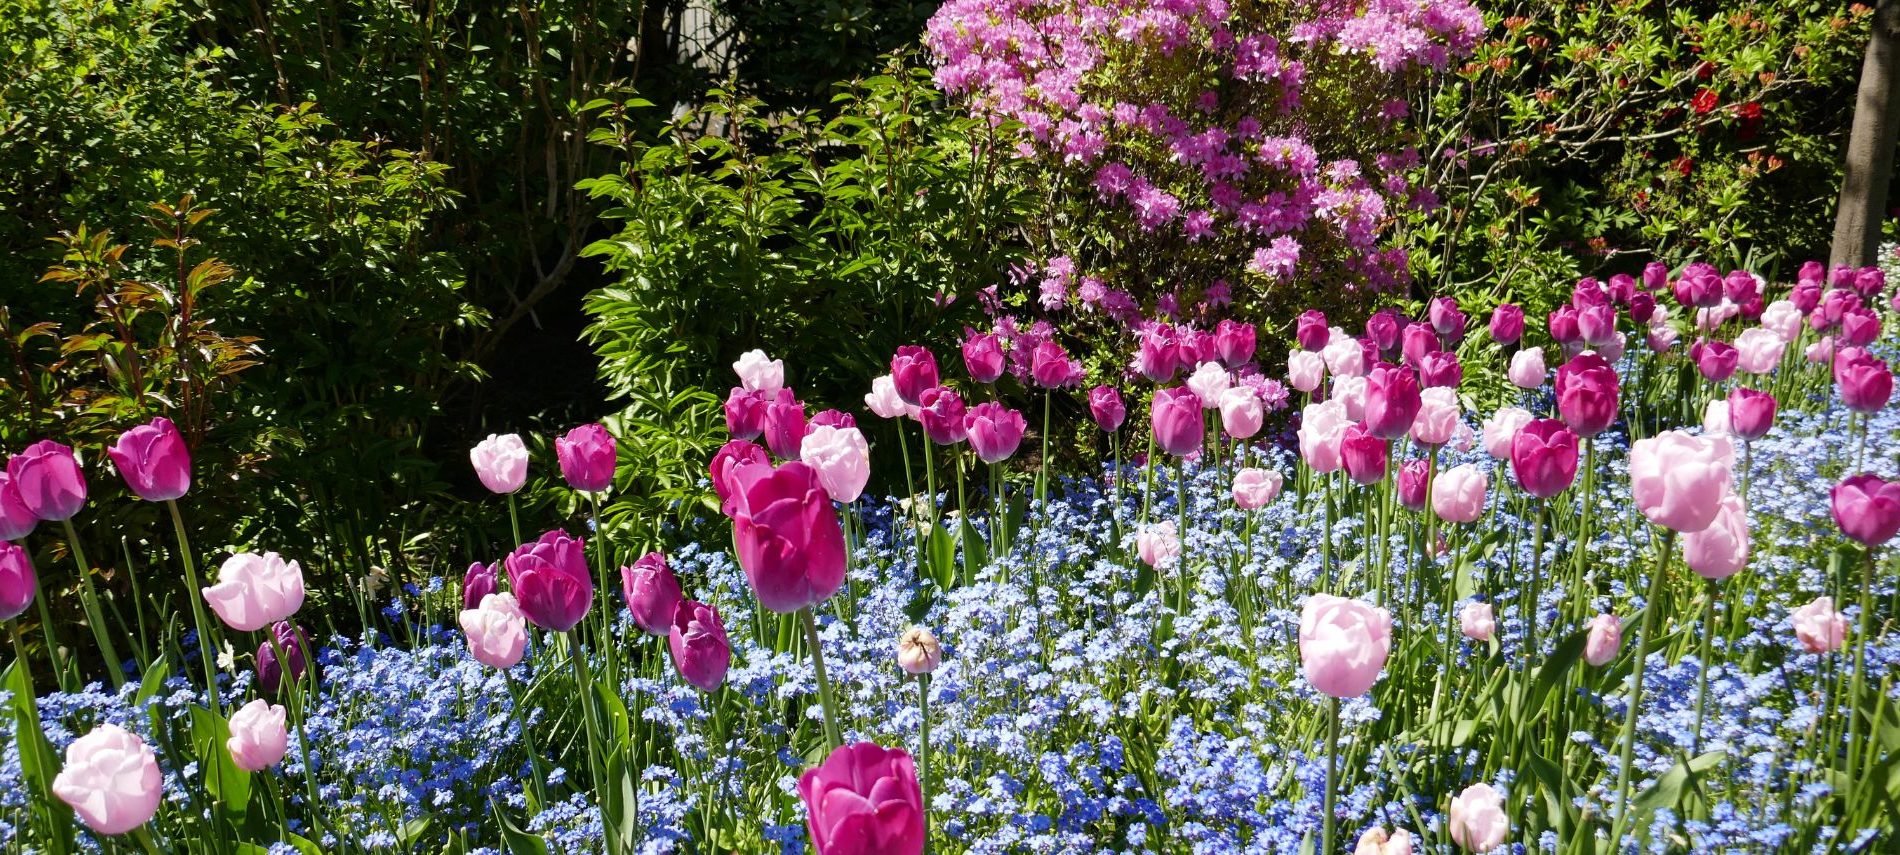 View of spring garden with tulips, hyacinth, and rhododendron